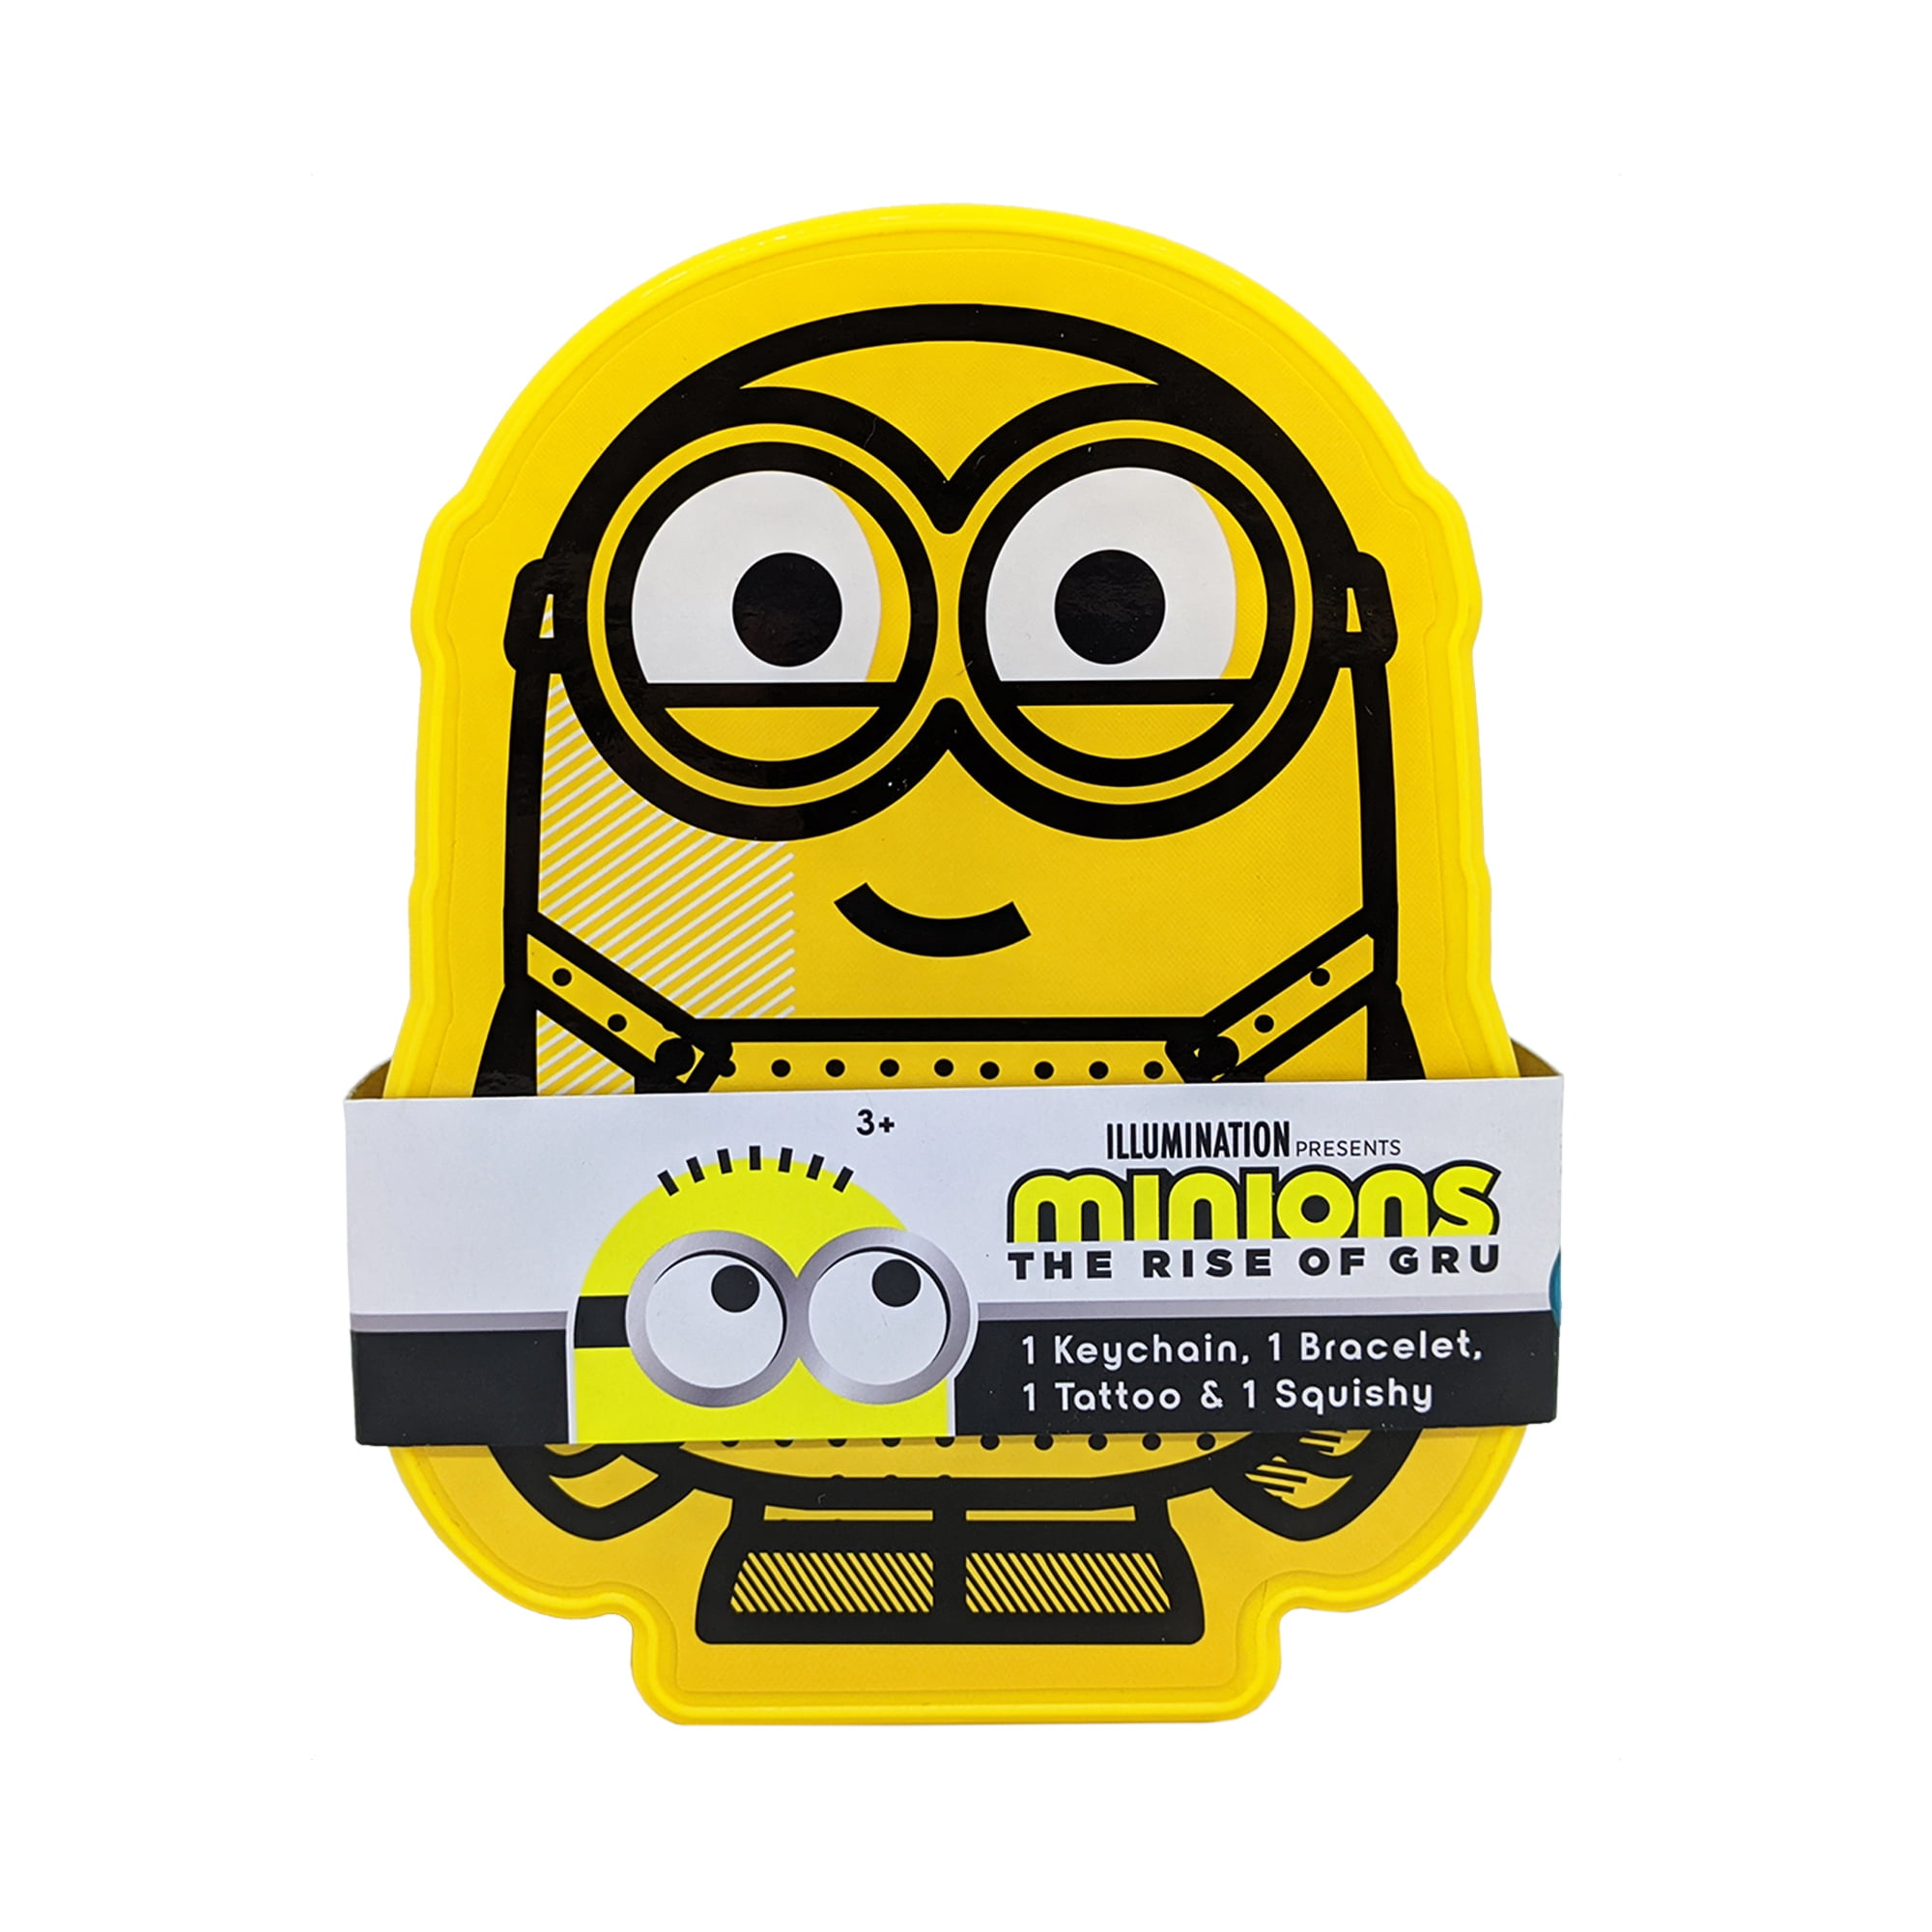 Minion Stickers x 5 - Shaped Minions Stickers - Birthday Party Favours  Supplies